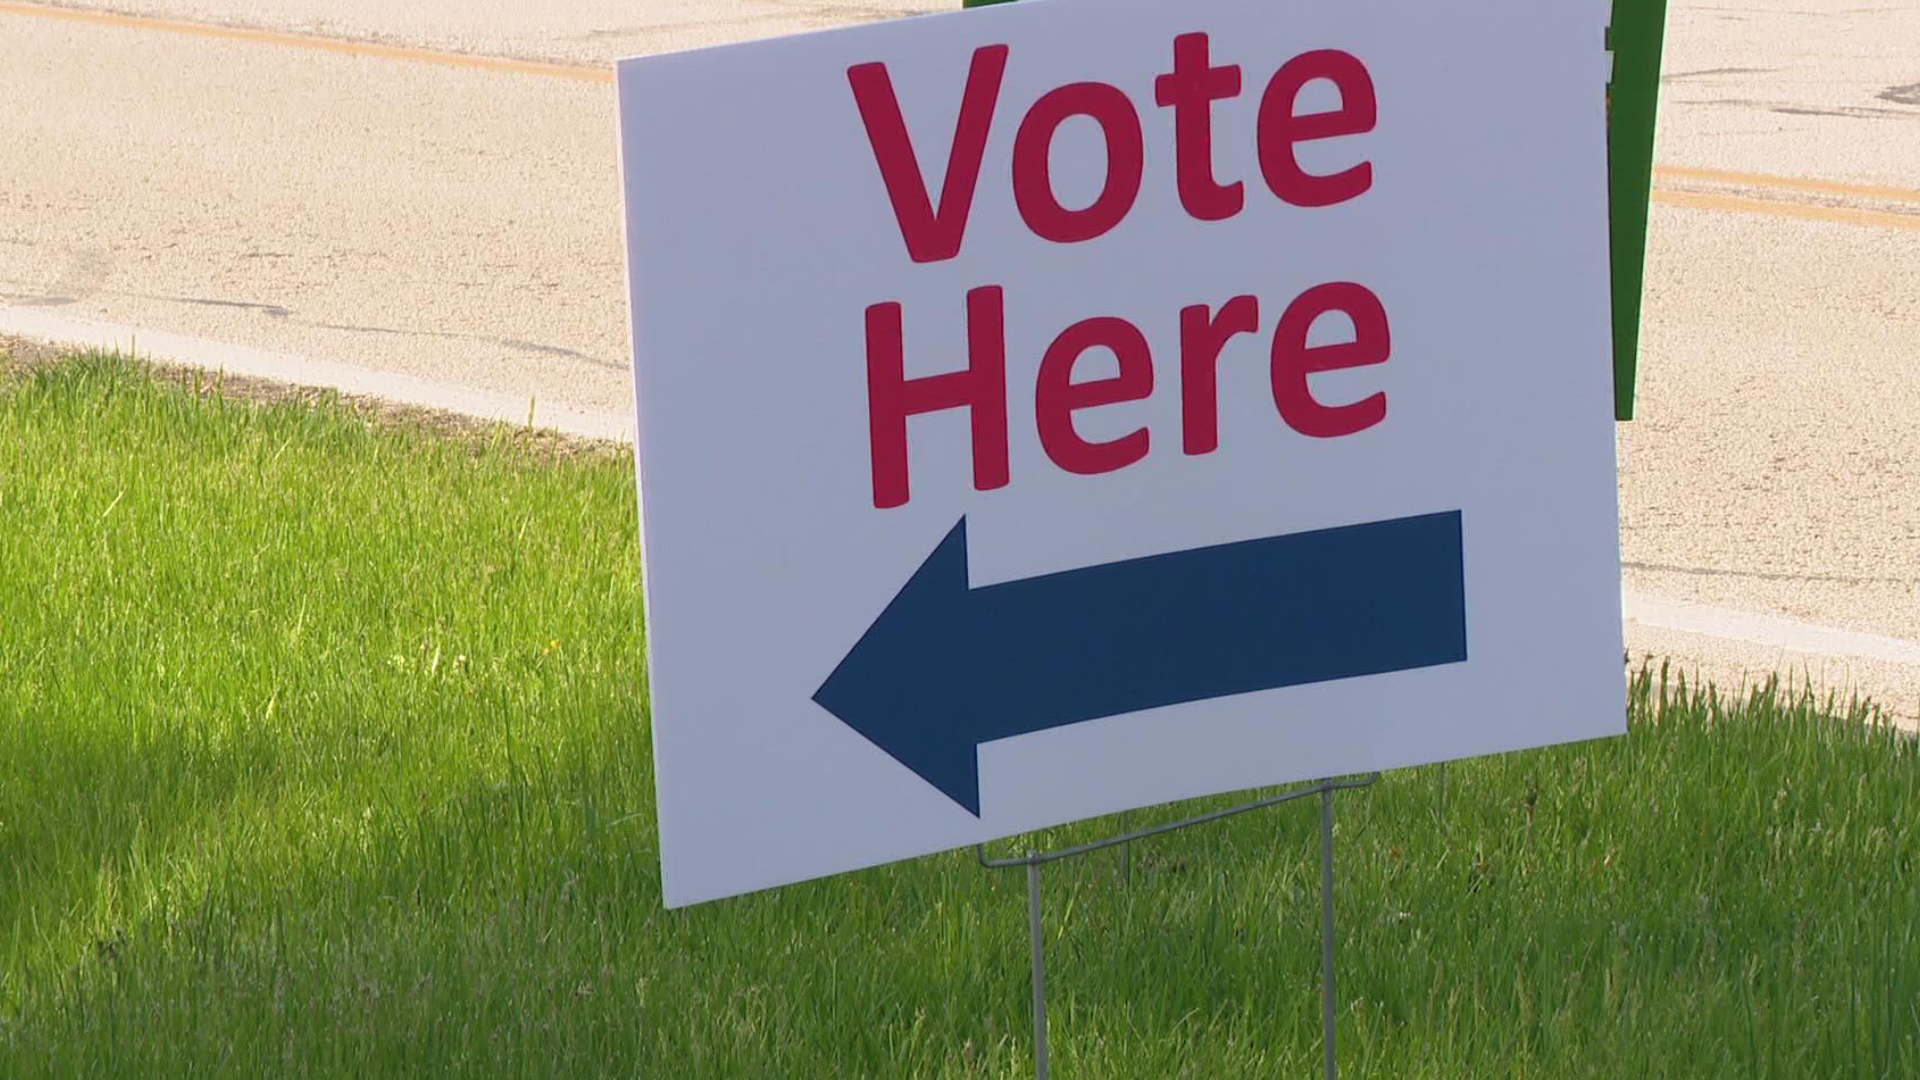 According to the Marion County Election Board, more than twice as many in-person early votes have been cast this year compared to the last midterm primary.